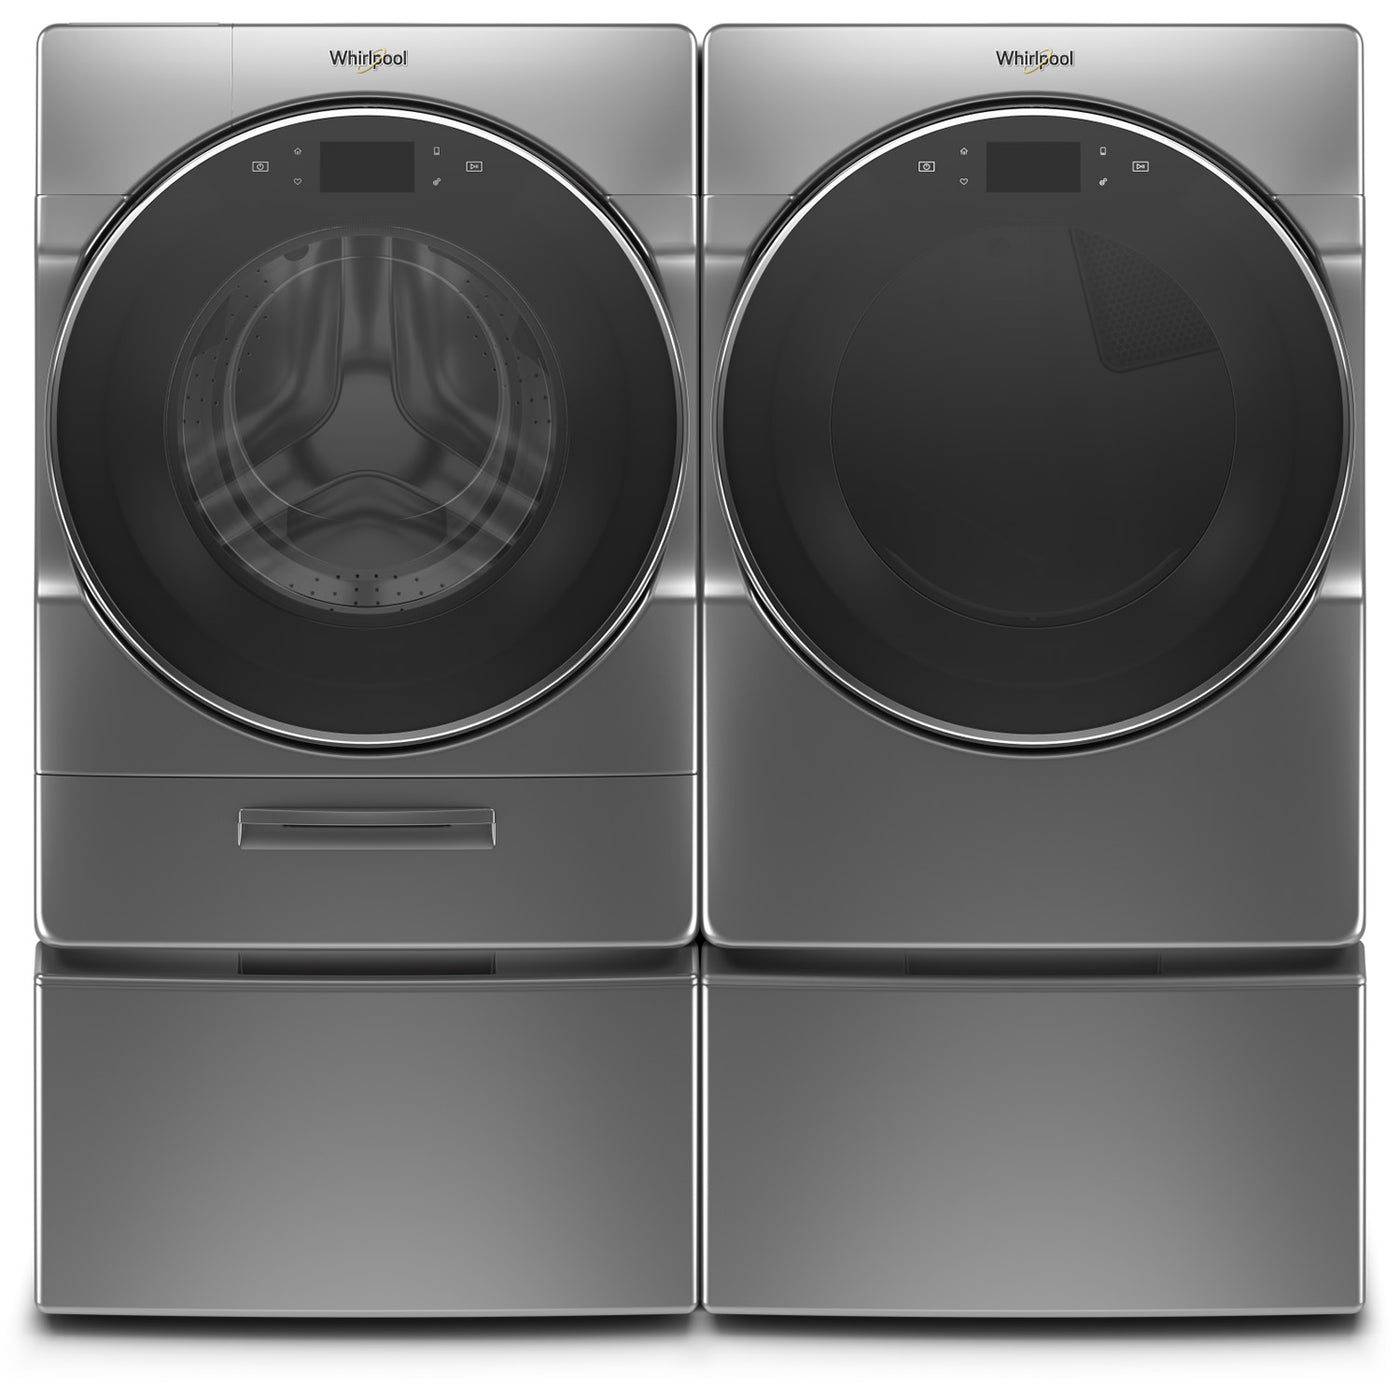 Whirlpool Chrome Shadow Front-Load Washer (5.8 cu. ft.) & Gas Dryer (7.4 cu. ft.) - WFW9620HC/WGD9620HC